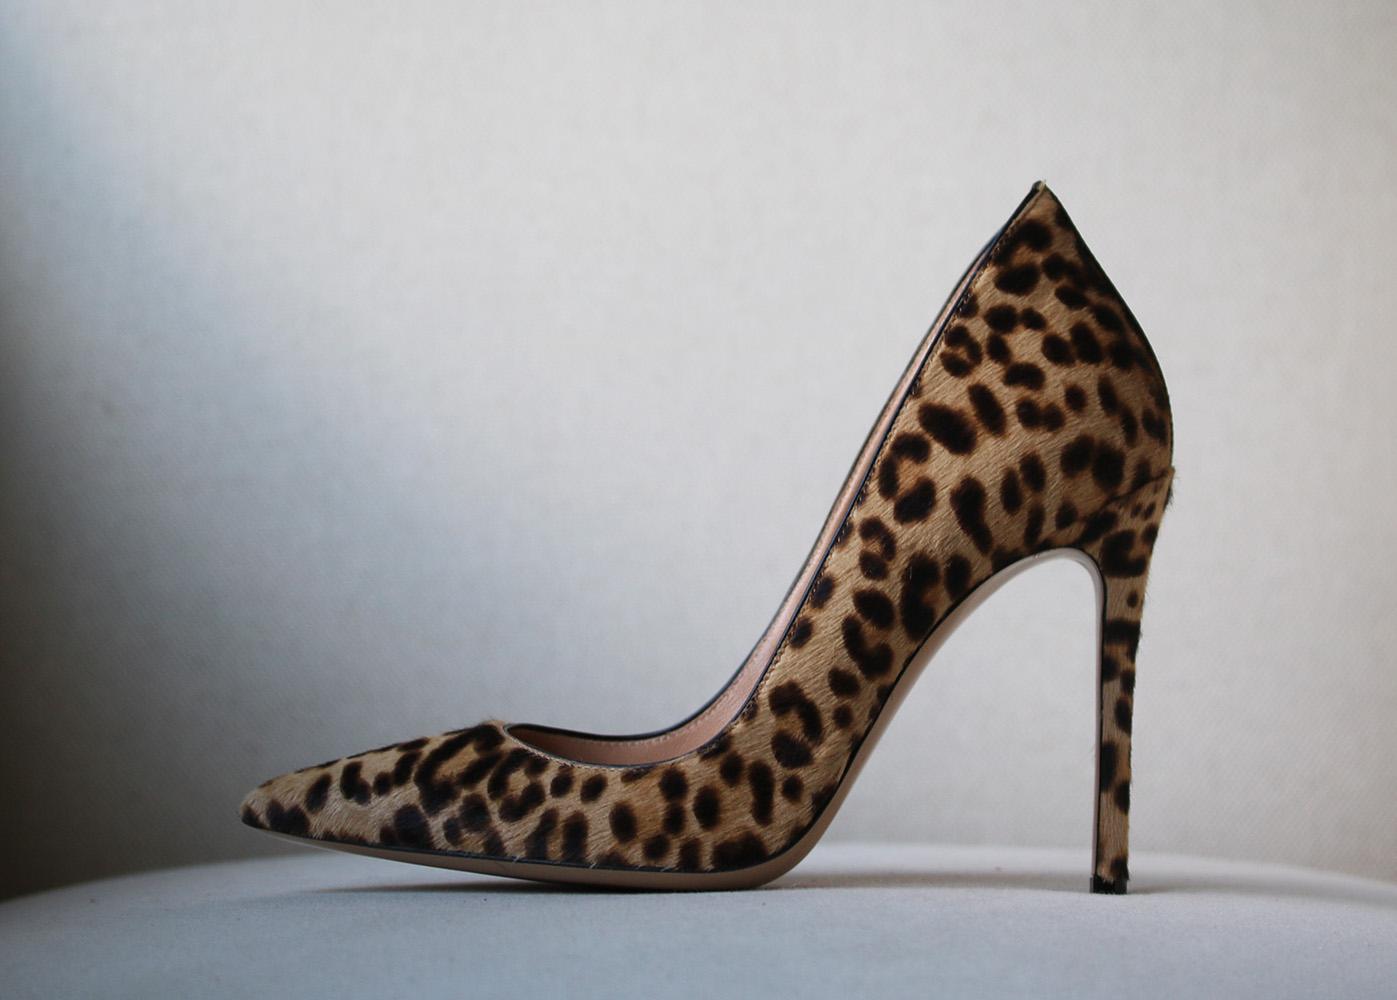 Leopard-print accessories are an essential part of every modern wardrobe. Gianvito Rossi's calf hair pumps have been finished by hand and have the perfect point-toe silhouette. Heel measures approximately 105mm/ 4 inches. Leopard-print calf hair.